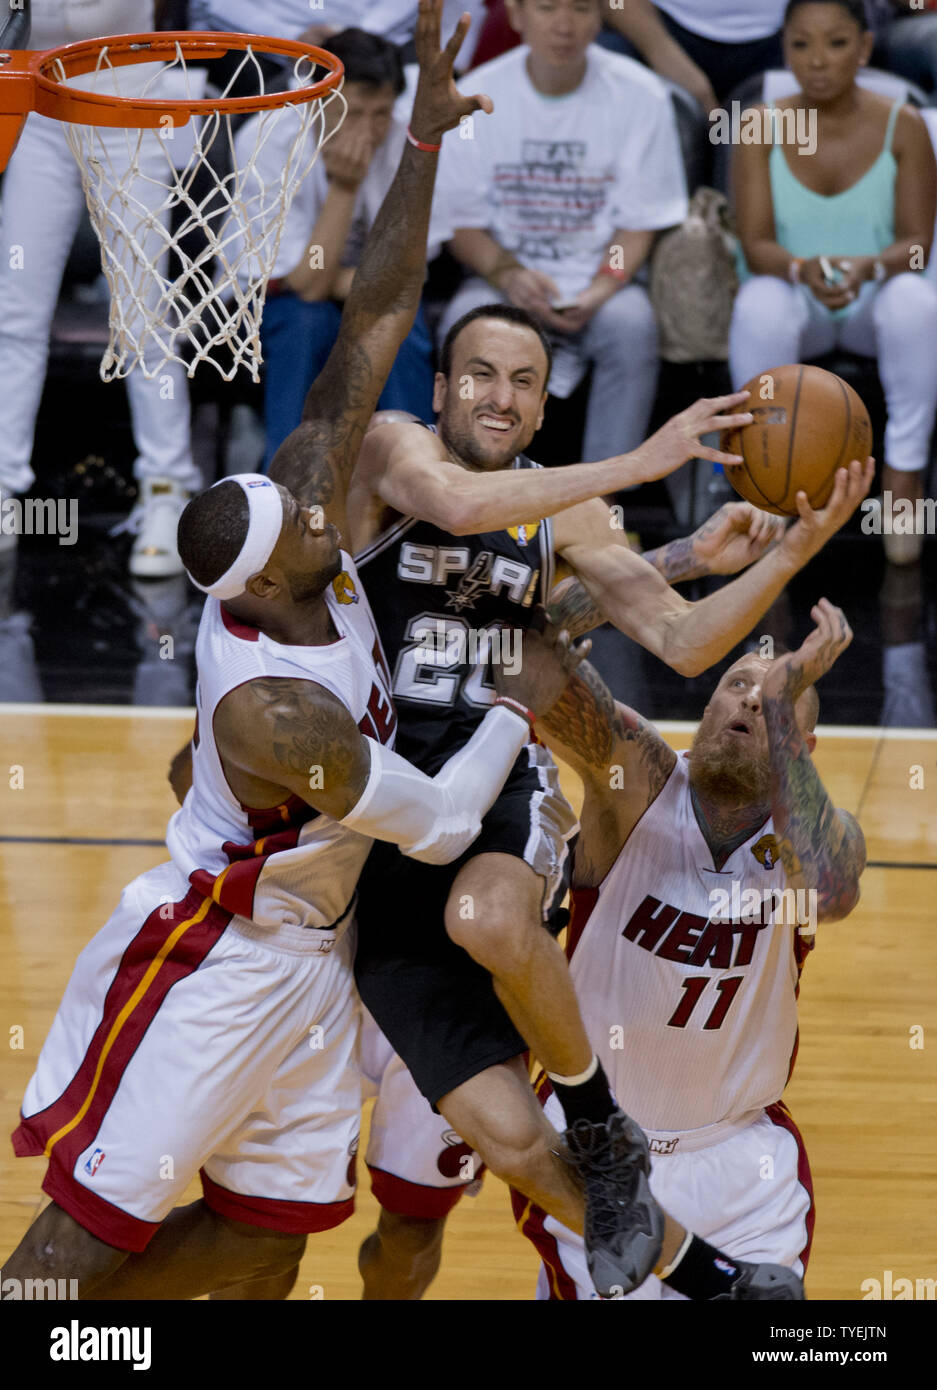 San Antonio Spurs  Manu Ginobili (20) goes up for the basket being guarded by Miami Heat  LeBron James (6) in game 3 of the NBA Finals at the American Airlines Arena, in Miami, June 10, 2014. The Spurs defeated the Heat 111-92 to take a 2 -1 game  lead in the best of seven series.    UPI/Gary I Rothstein Stock Photo